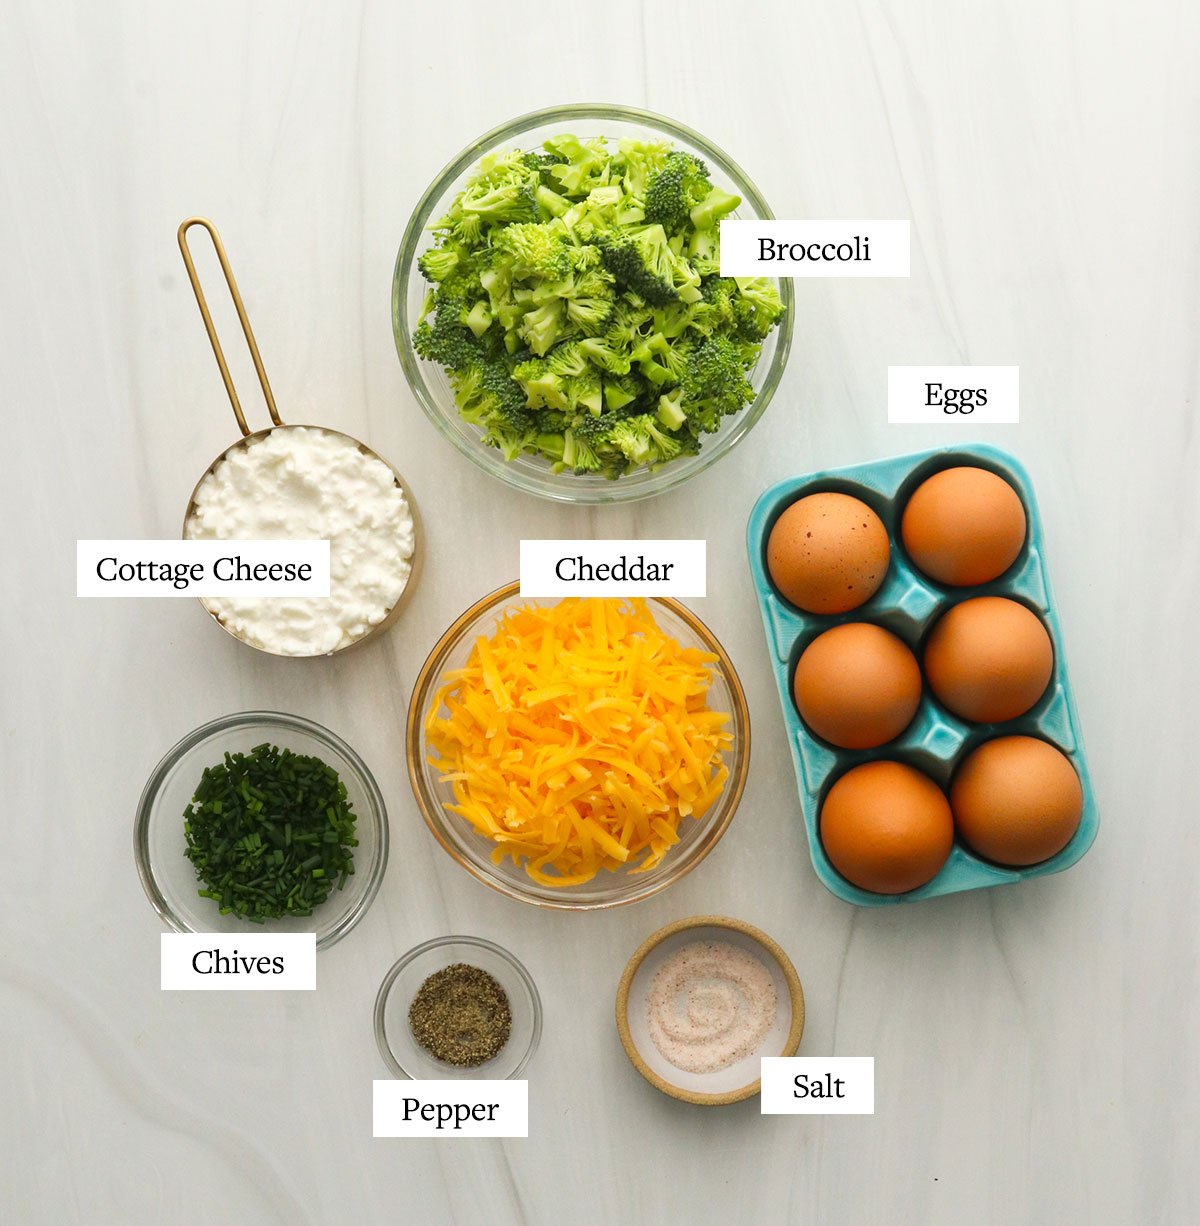 crustless quiche ingredients labeled on a white surface.